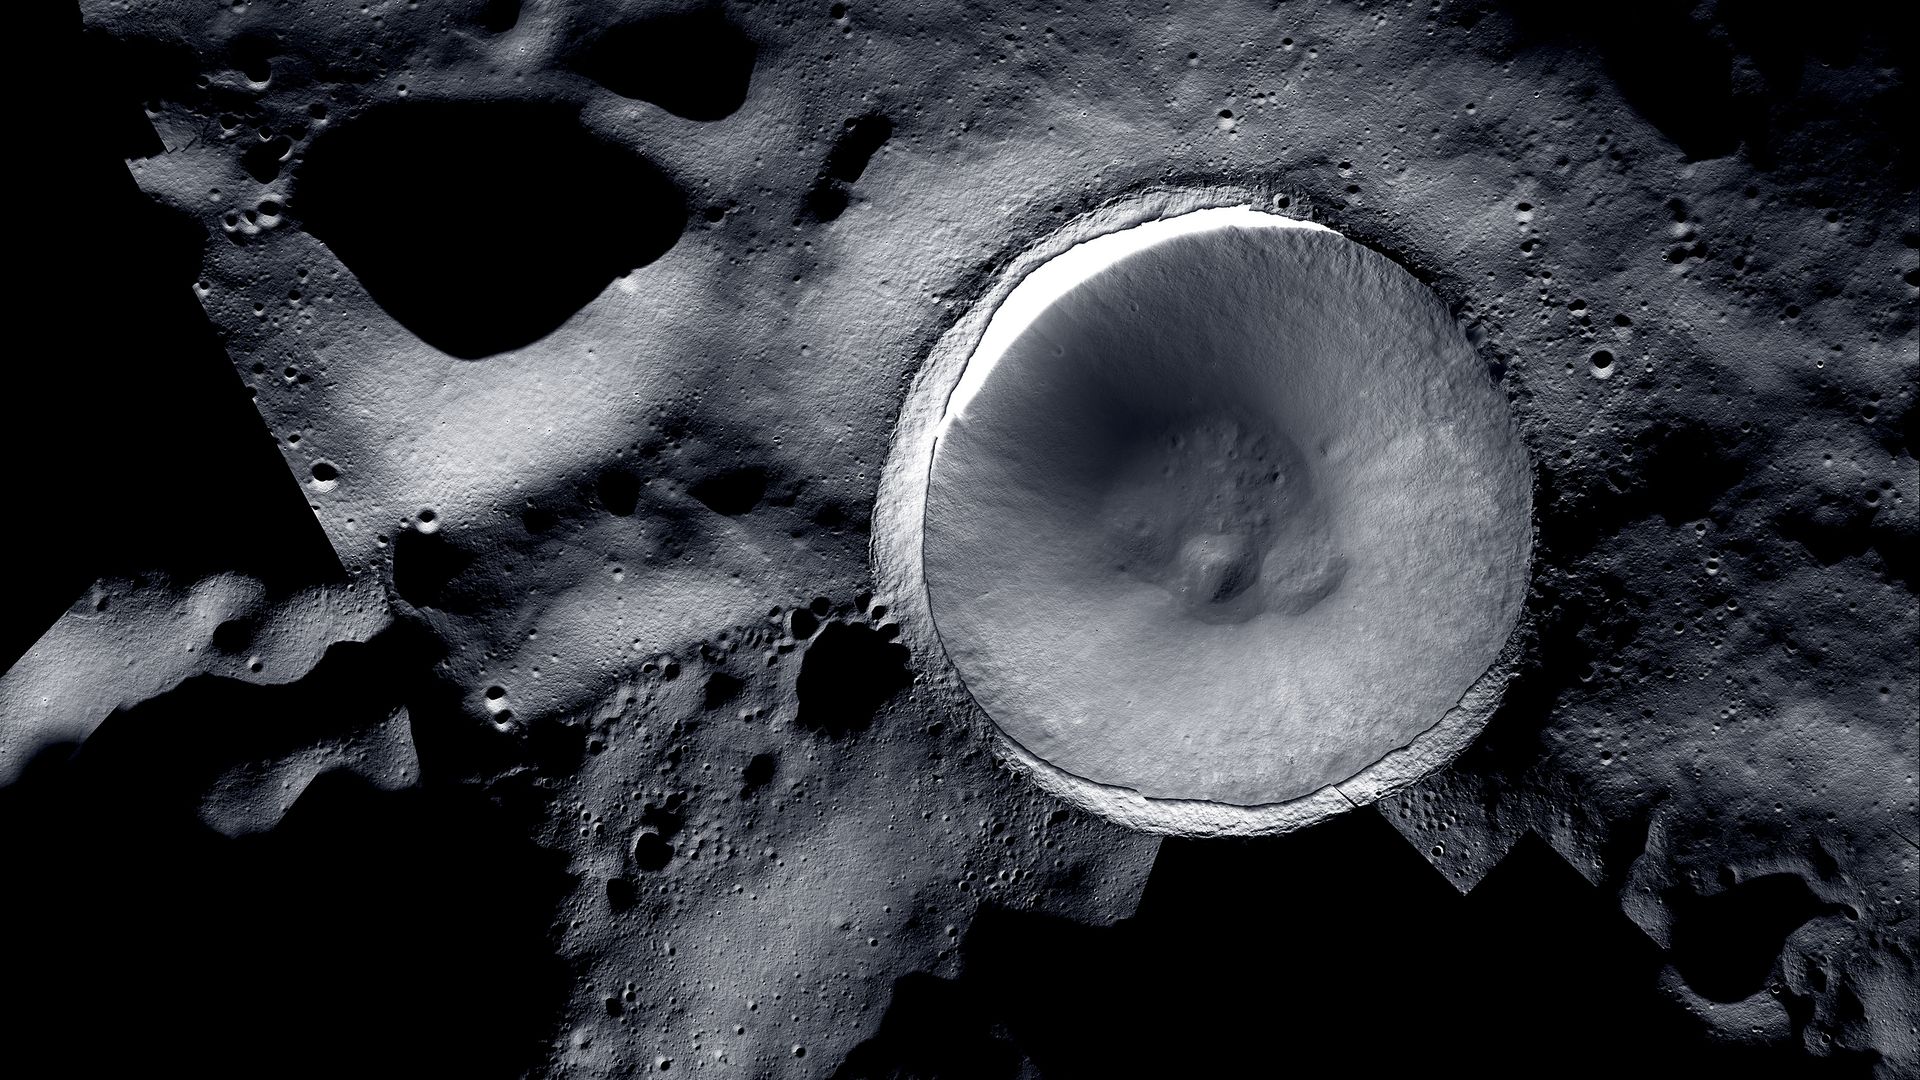 A composite image of the Shackleton Crater at the lunar south pole.